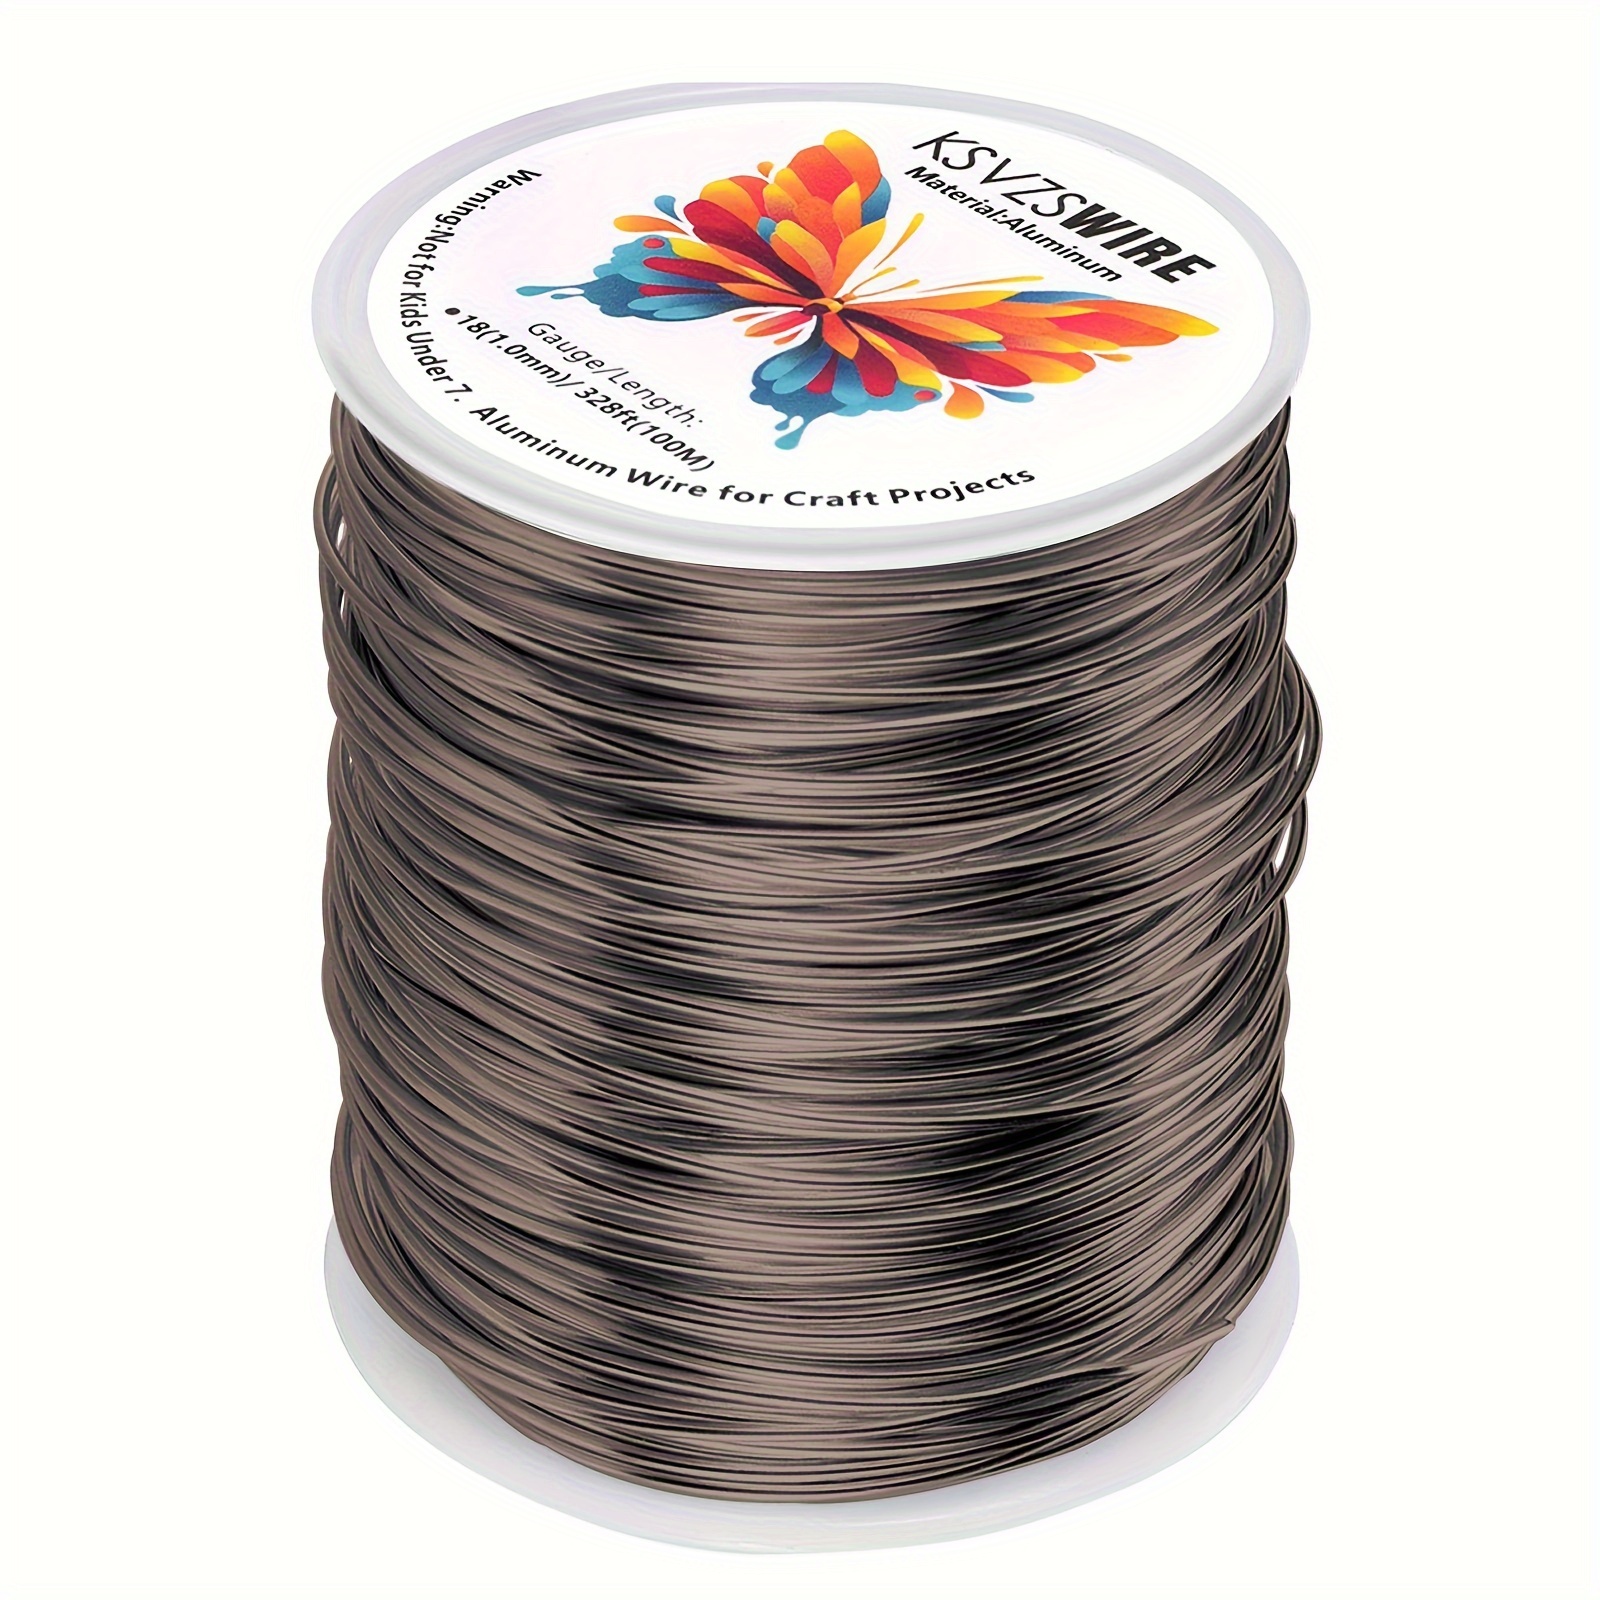  18 Gauge Aluminum Craft Wire Jewelry Making, 328 FT Metal Wire  Armature Bendable Wire for Bonsai Trees, Sculpting, DIY Crafts Beading  Floral (Silver, 1 mm Thickness)